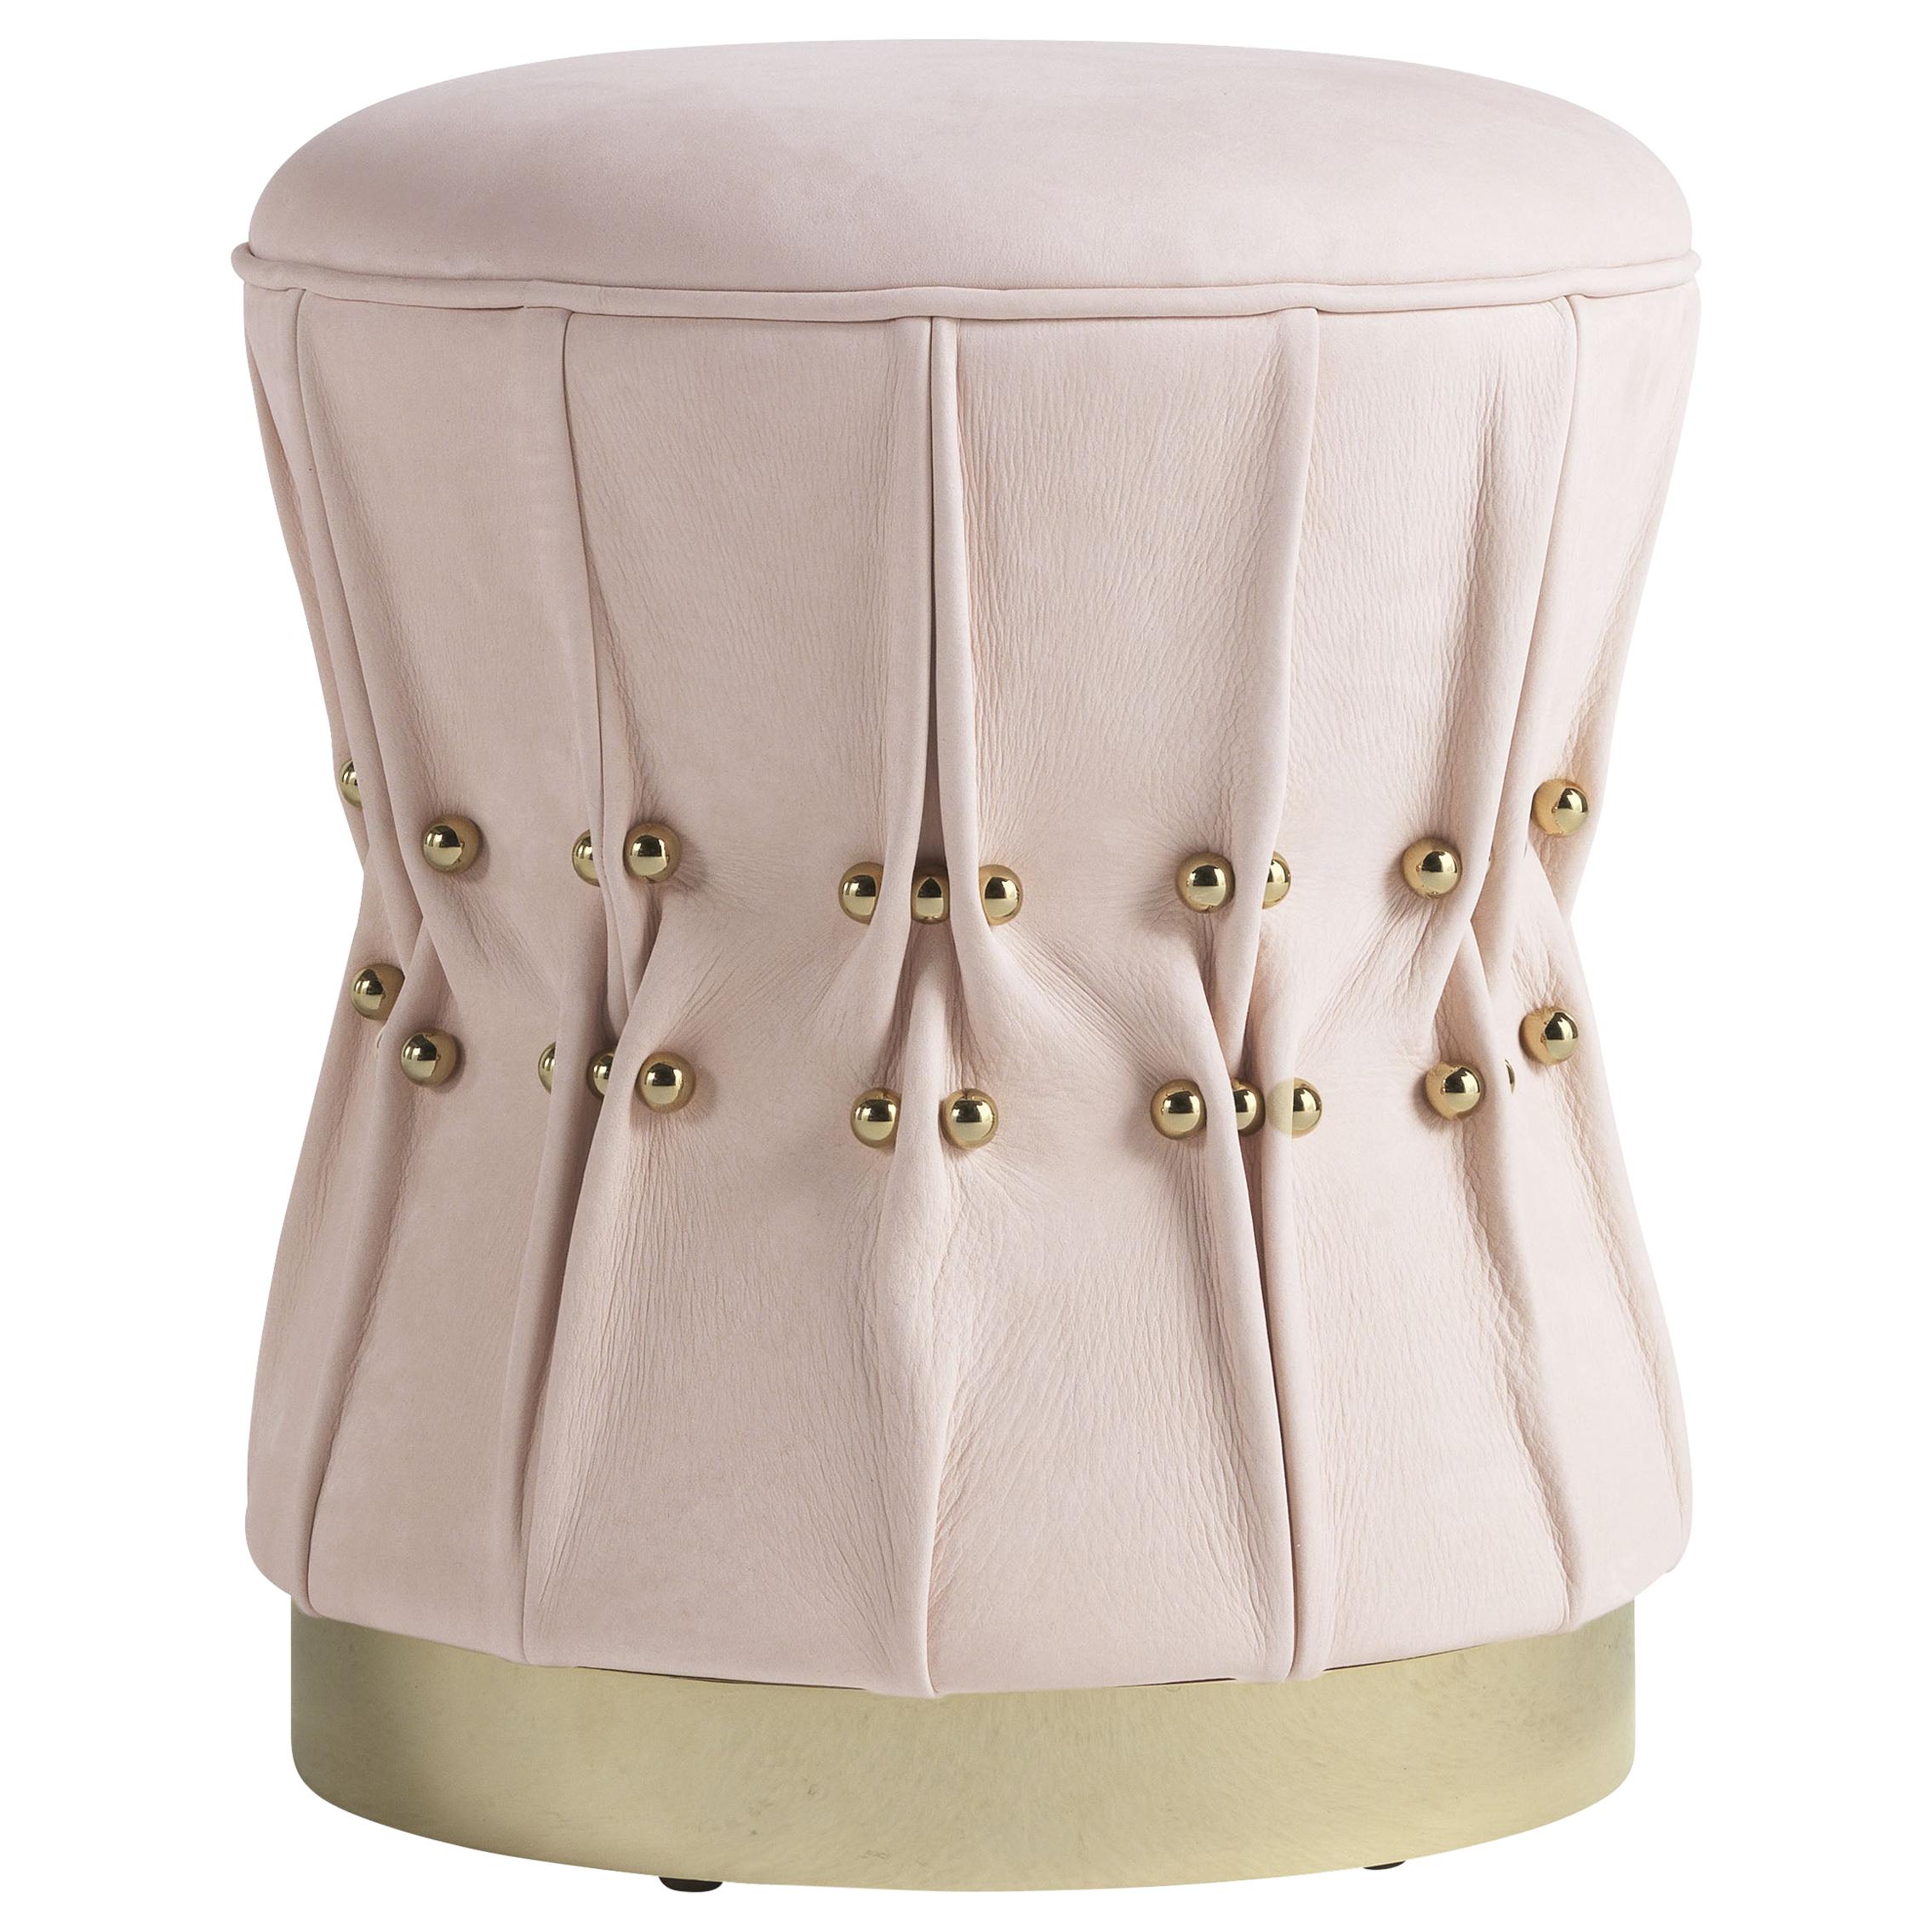 21st Century Inanda Pouf in Light Pink Leather by Roberto Cavalli Home Interiors